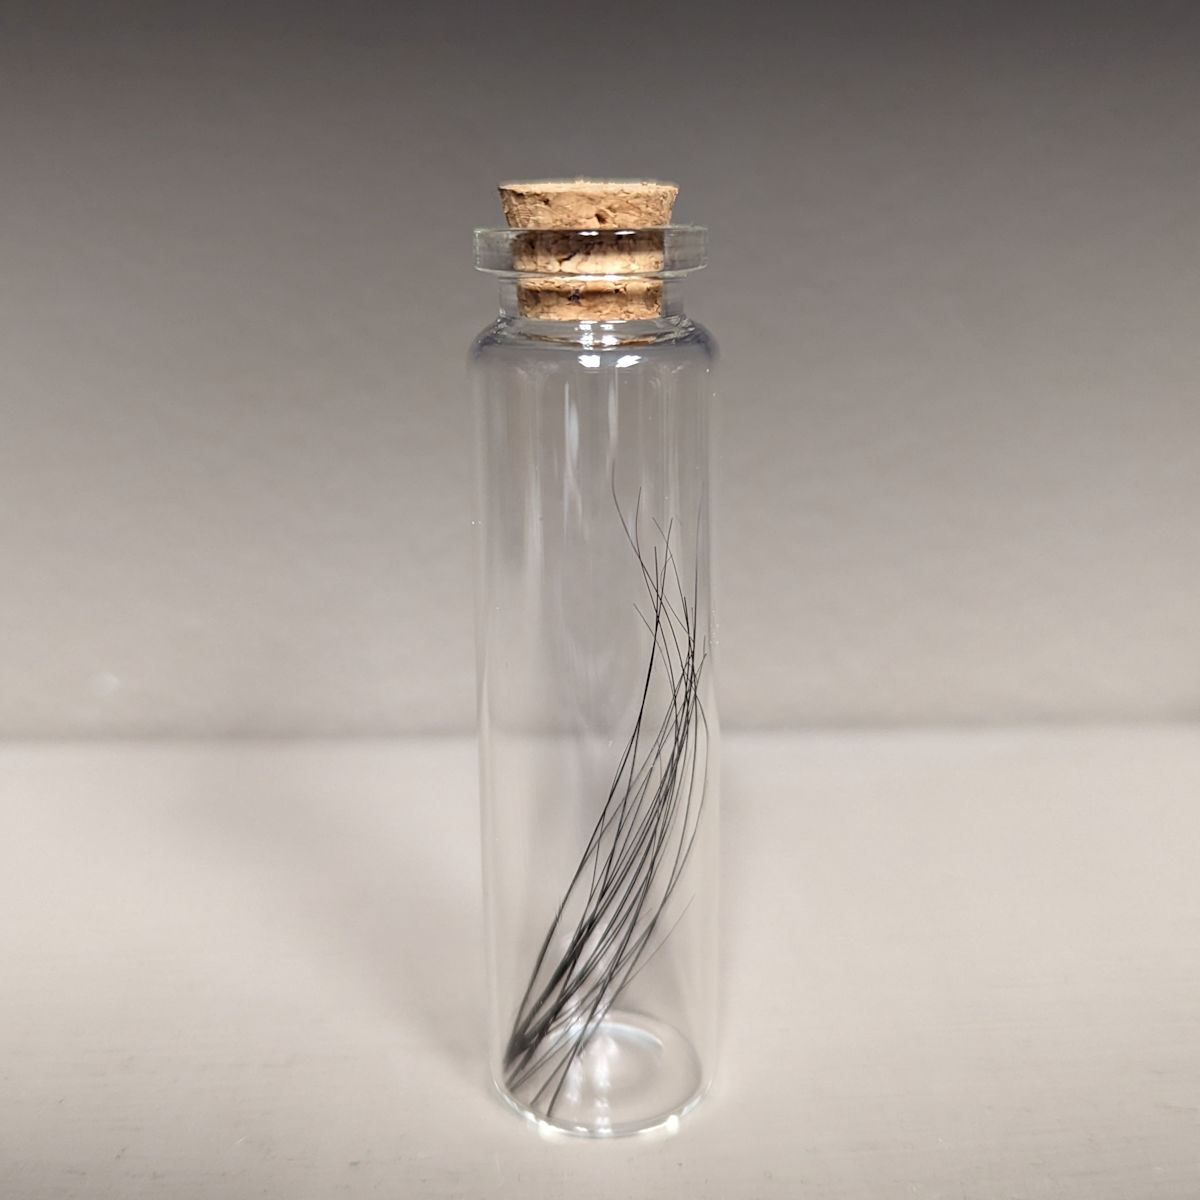 Whiskers in Glass Bottle - $19